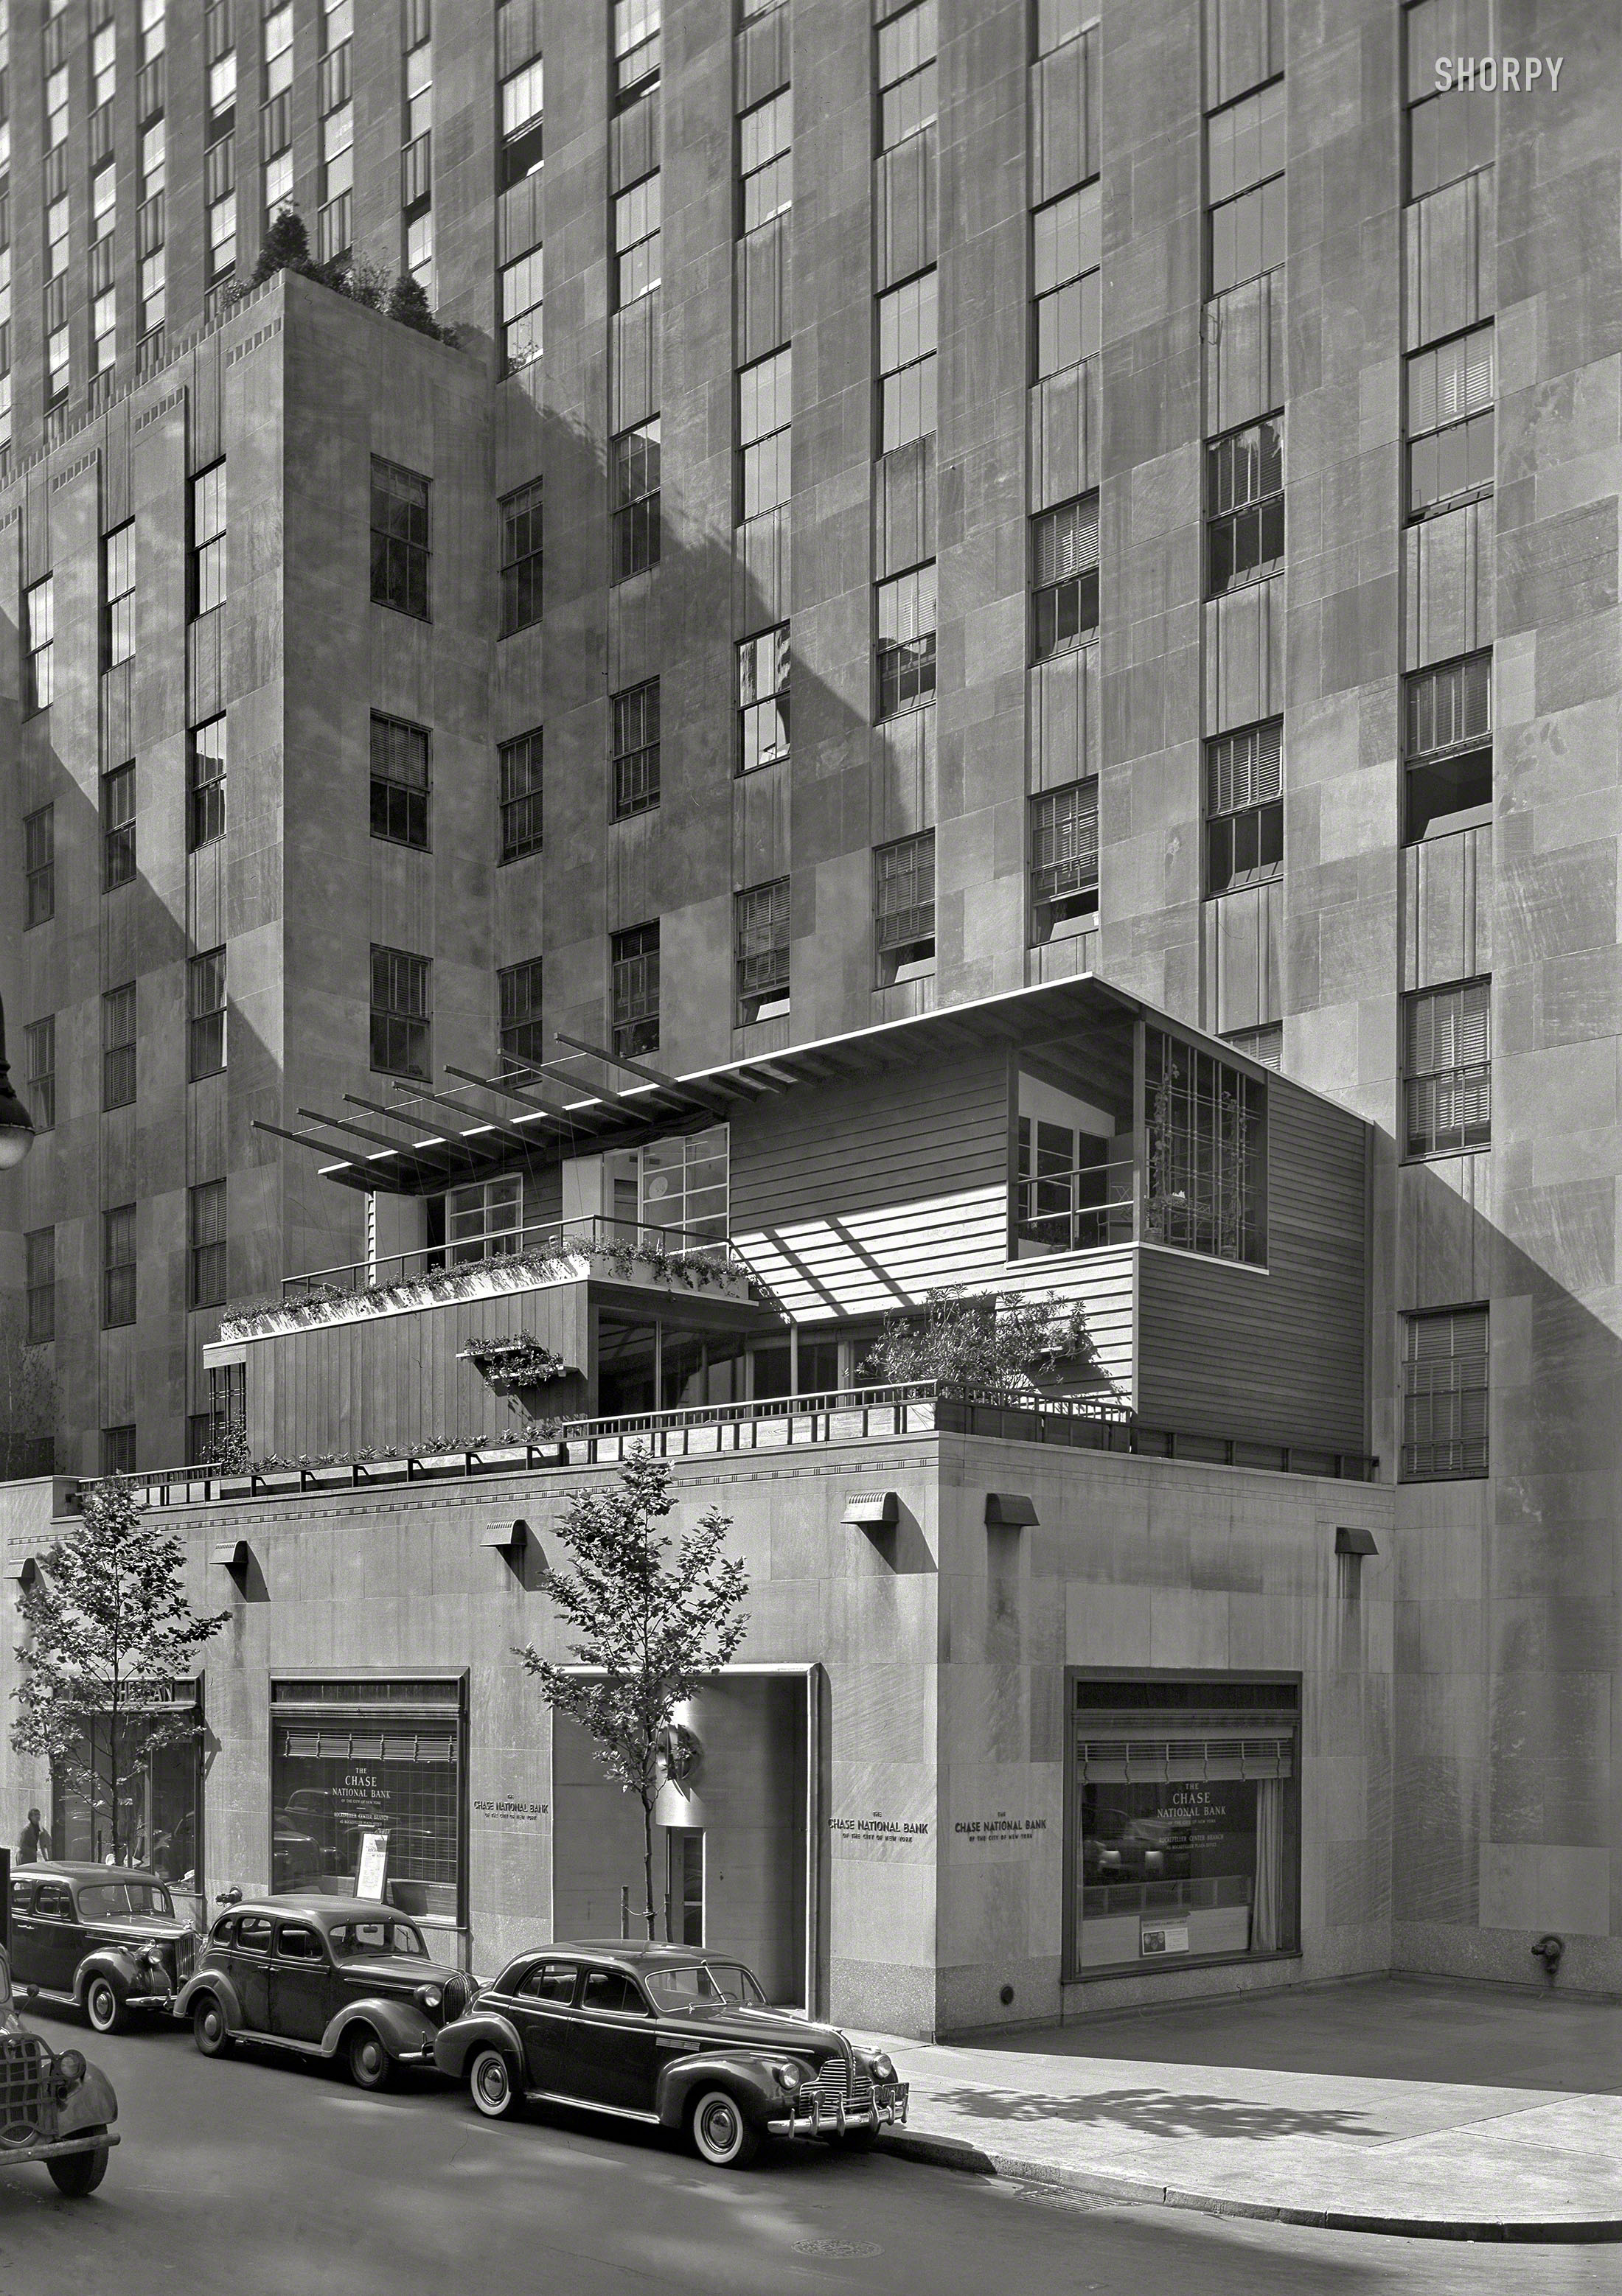 HOME EXHIBIT PLANNED
Dwelling Rises on Terrace in Rockefeller Center

&nbsp; &nbsp; &nbsp; &nbsp; NEW YORK -- On the second-floor terrace of the International Building at 51st Street near Fifth Avenue, a seven-room dwelling is under construction as the focal point in what is designed to be a home-building center and exhibit. It is being erected by the Rockefeller Home Center, successor to the Permanent Exhibition of Decorative Arts and Crafts (PEDAC).
&nbsp; &nbsp; &nbsp; &nbsp; The dwelling is of modern design by Edward D. Stone and the exterior is of redwood. In the first floor is a "three-purpose" room with a glass-enclosed side opening onto a terrace. Construction of the exhibition house, which is sponsored by Collier's magazine, is under direction of Irons & Reynolds, contractors.
-- News item, May 16, 1940

July 15, 1940. "Collier's House at PEDAC, New York City. Exterior from below. Dan Cooper, decorator; Edward Durrell Stone, architect." Large-format acetate negative by Gottscho-Schleisner. View full size.